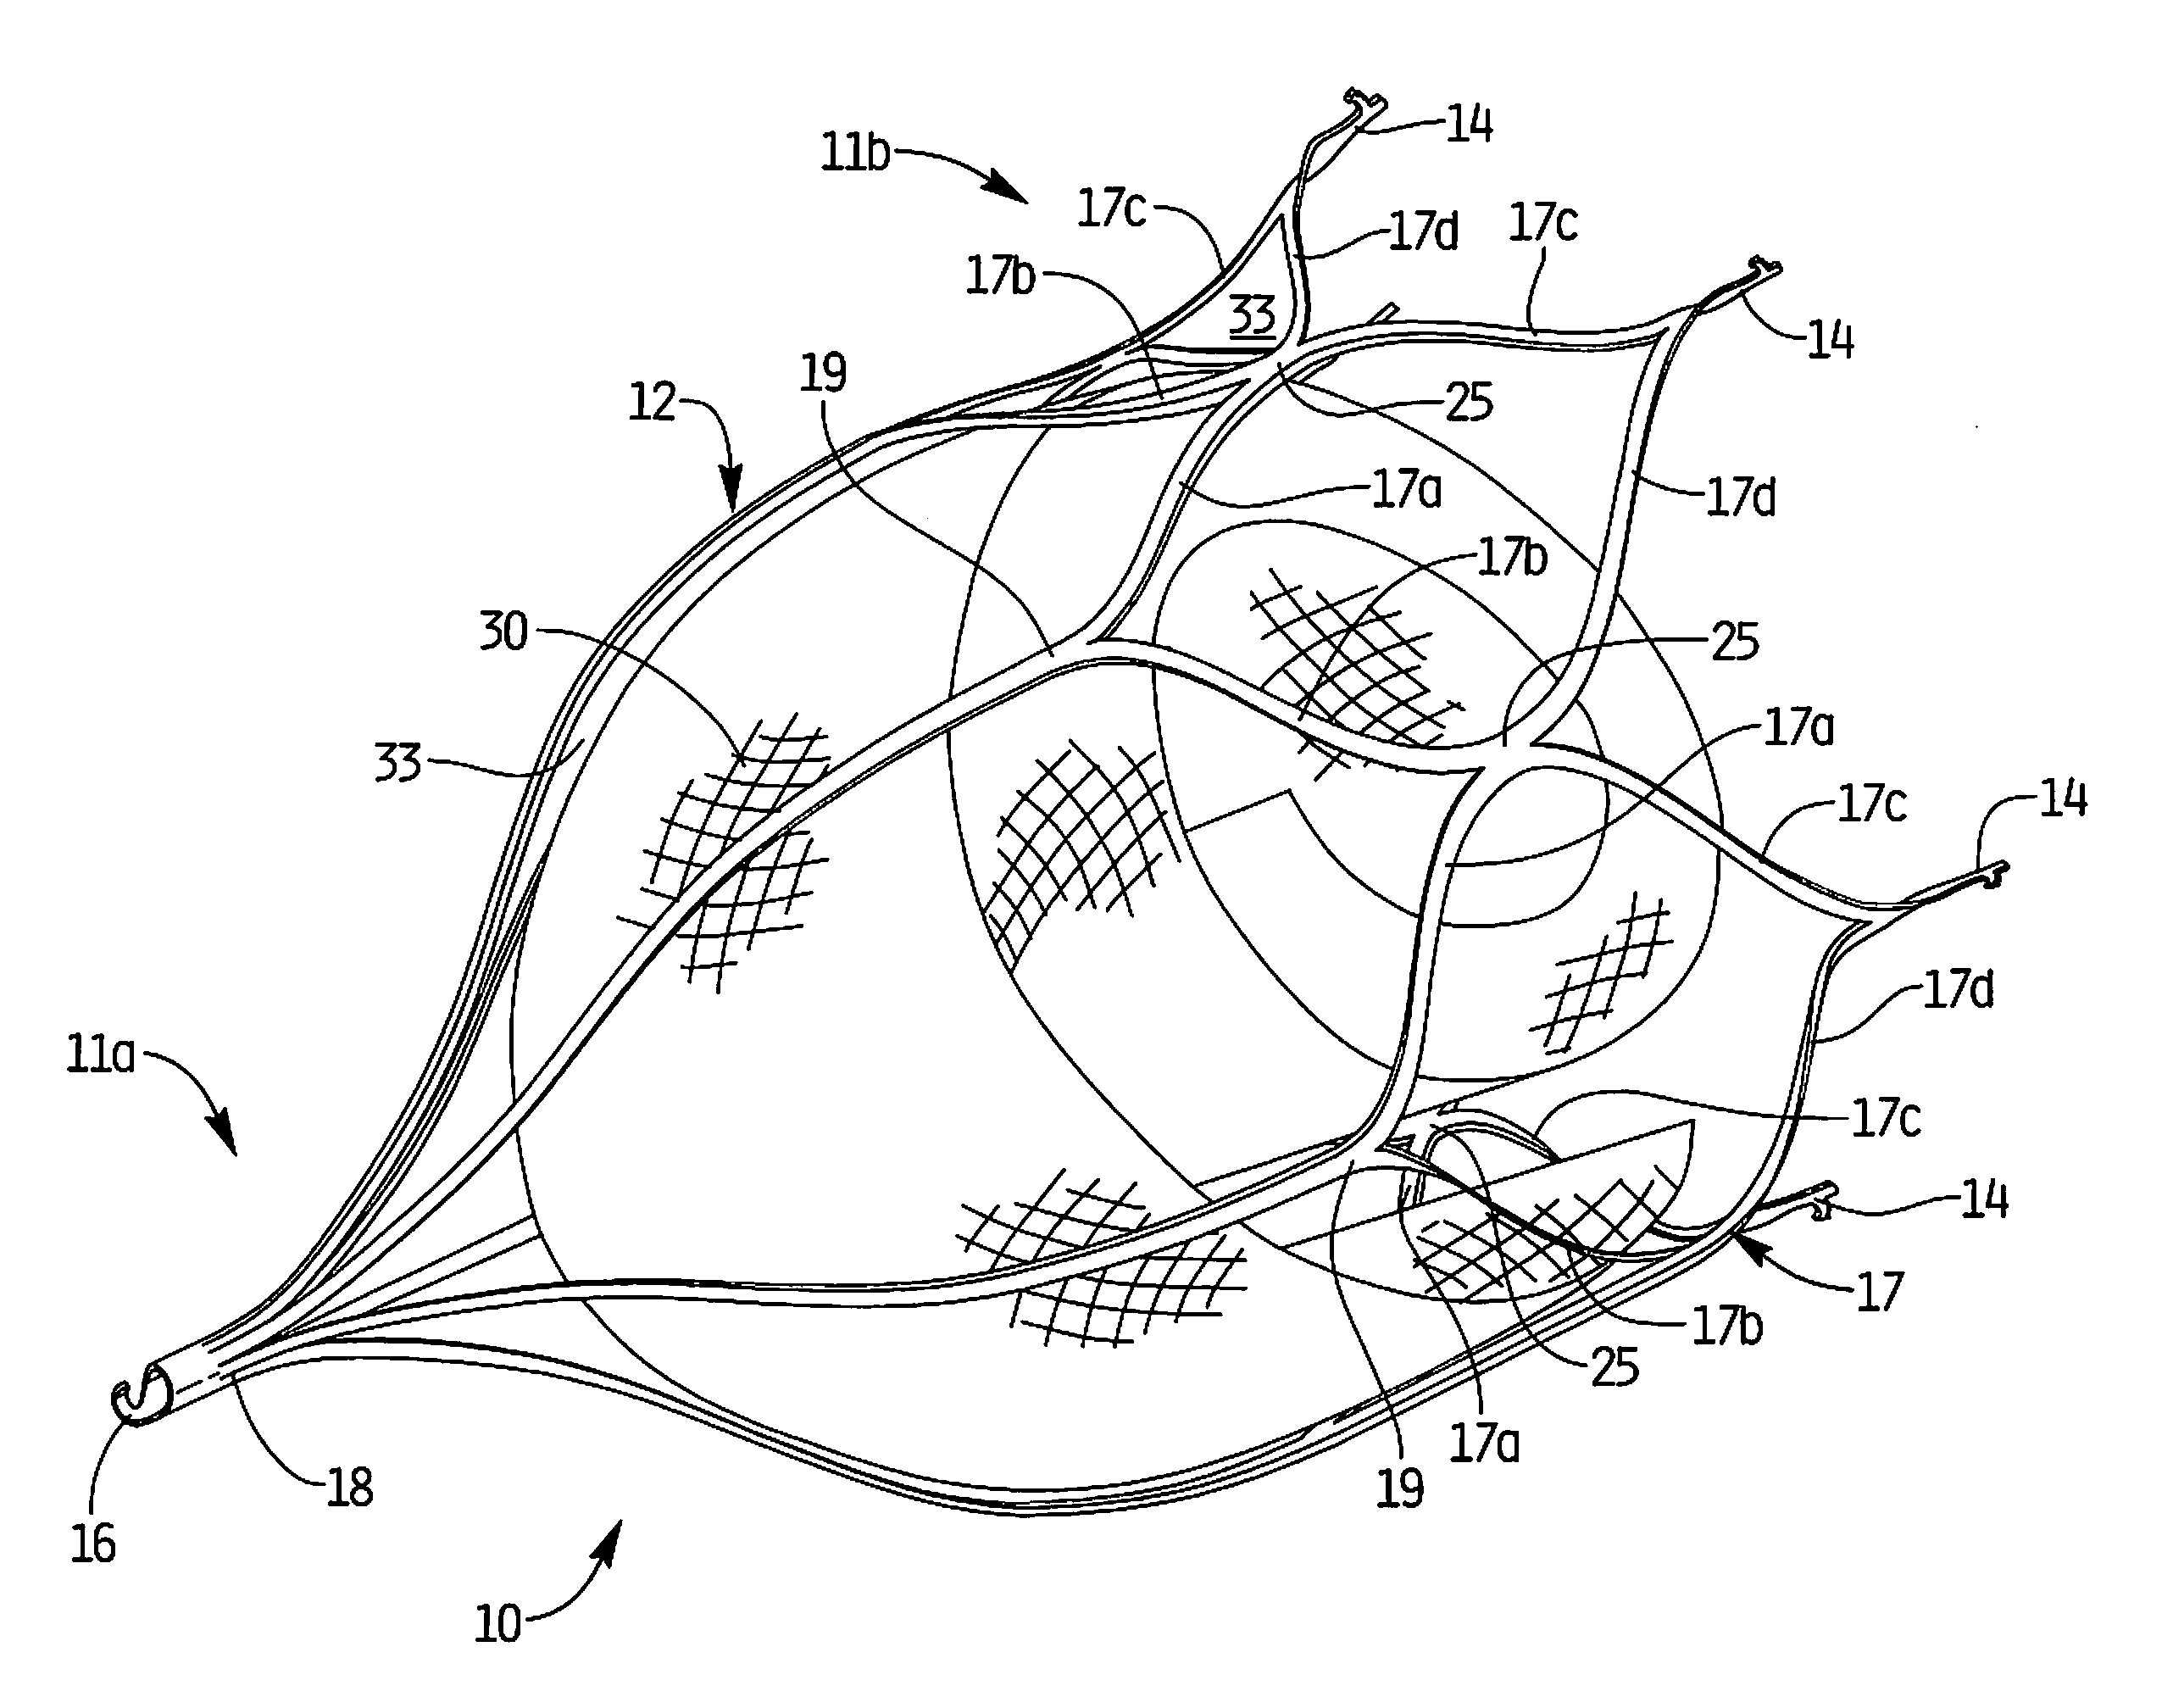 Device for preventing clot migration from left atrial appendage